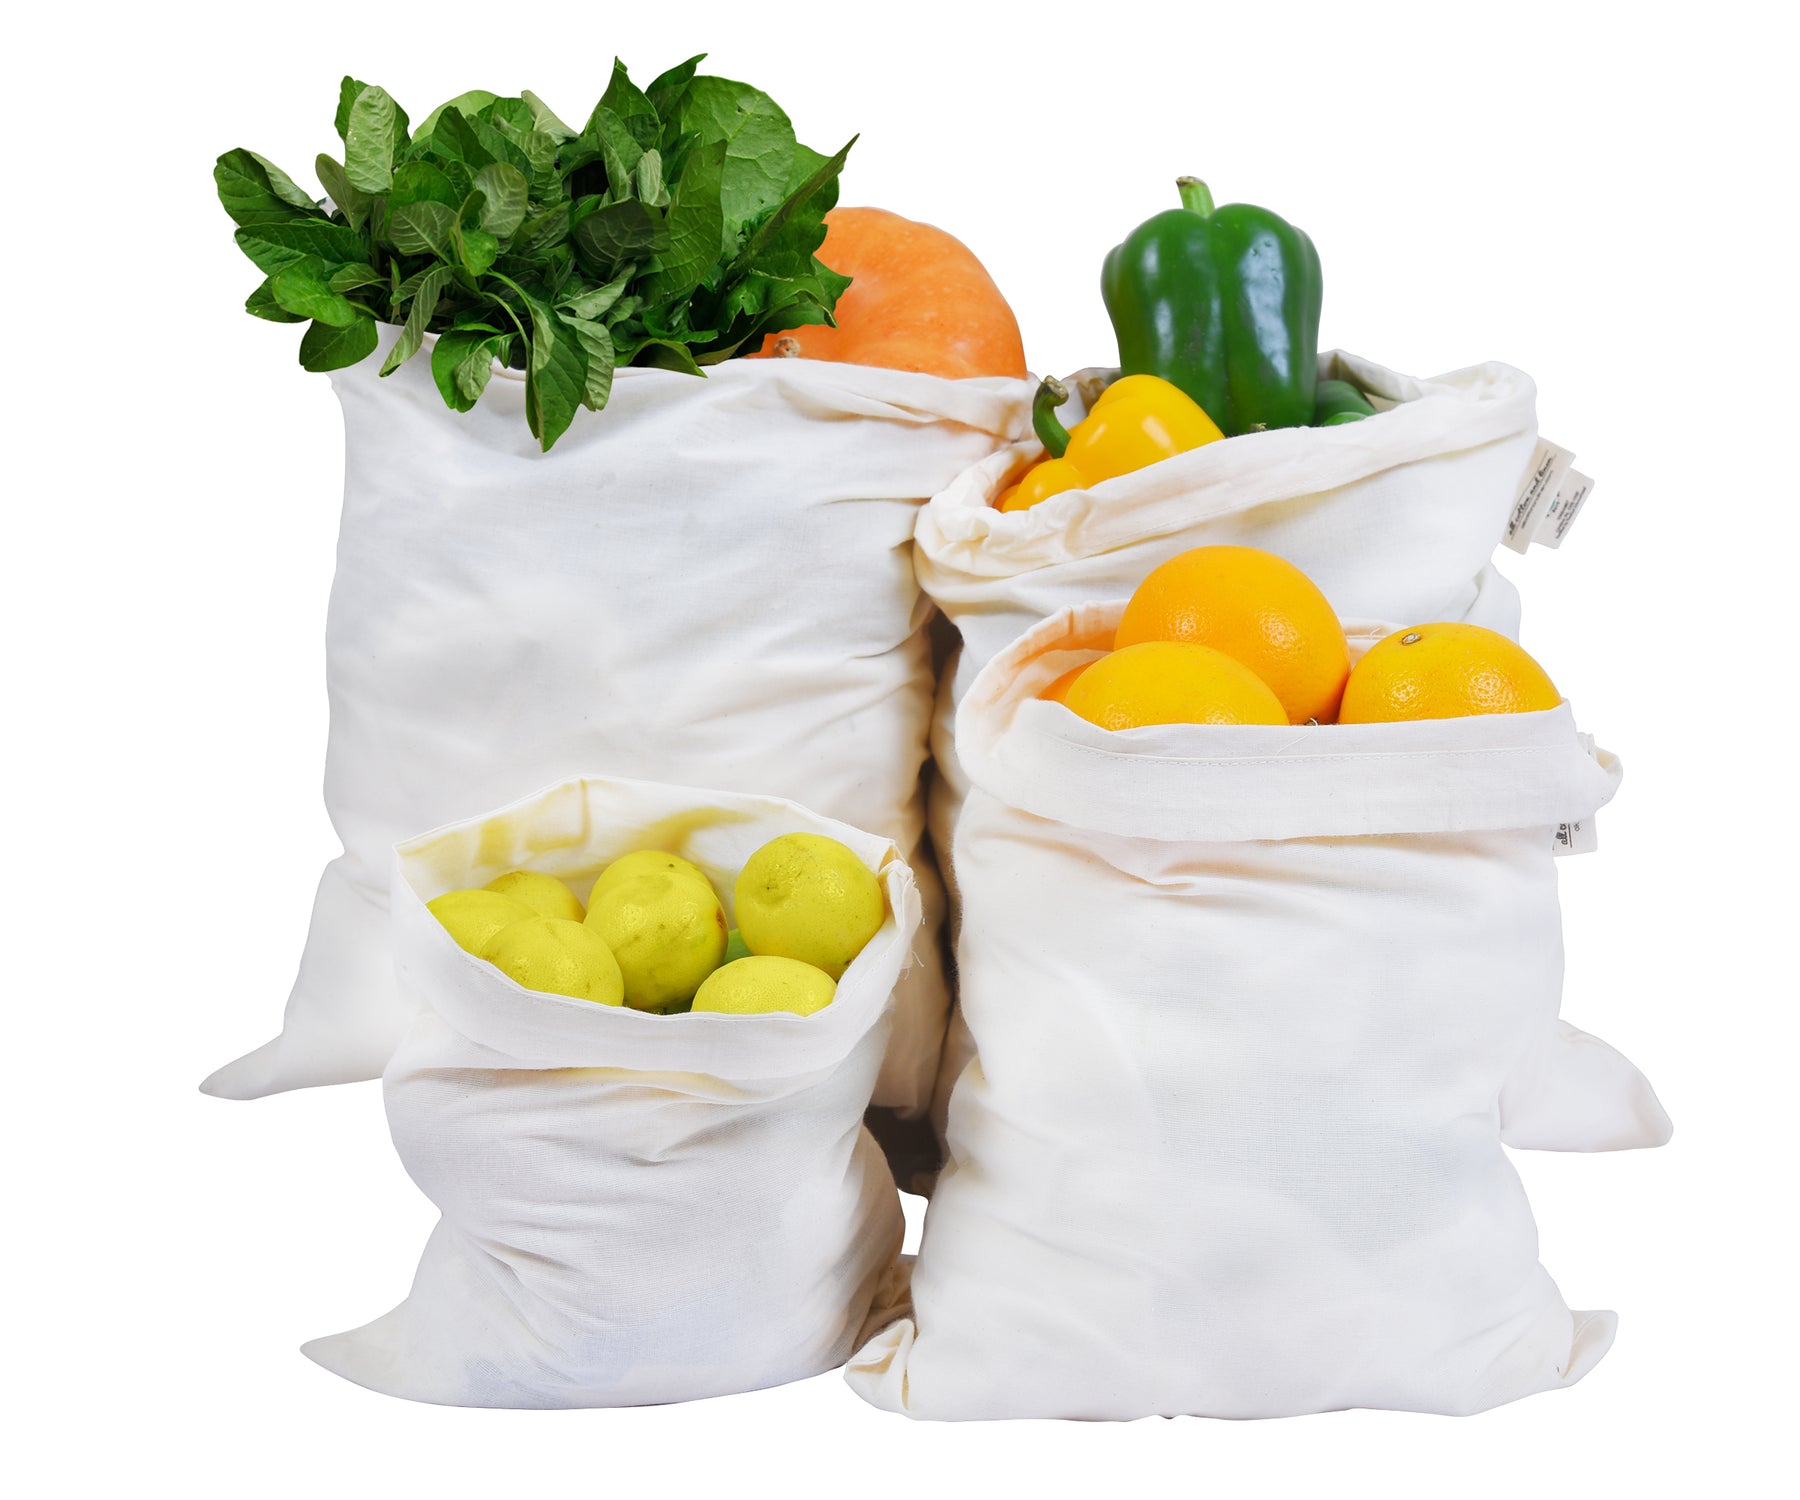 Make sustainable choices with muslin drawstring bags, cotton muslin bags, cotton mesh produce bags, and reusable cotton produce bags. These options prioritize environmentally friendly packaging and storage solutions, reducing waste and supporting a greener future.